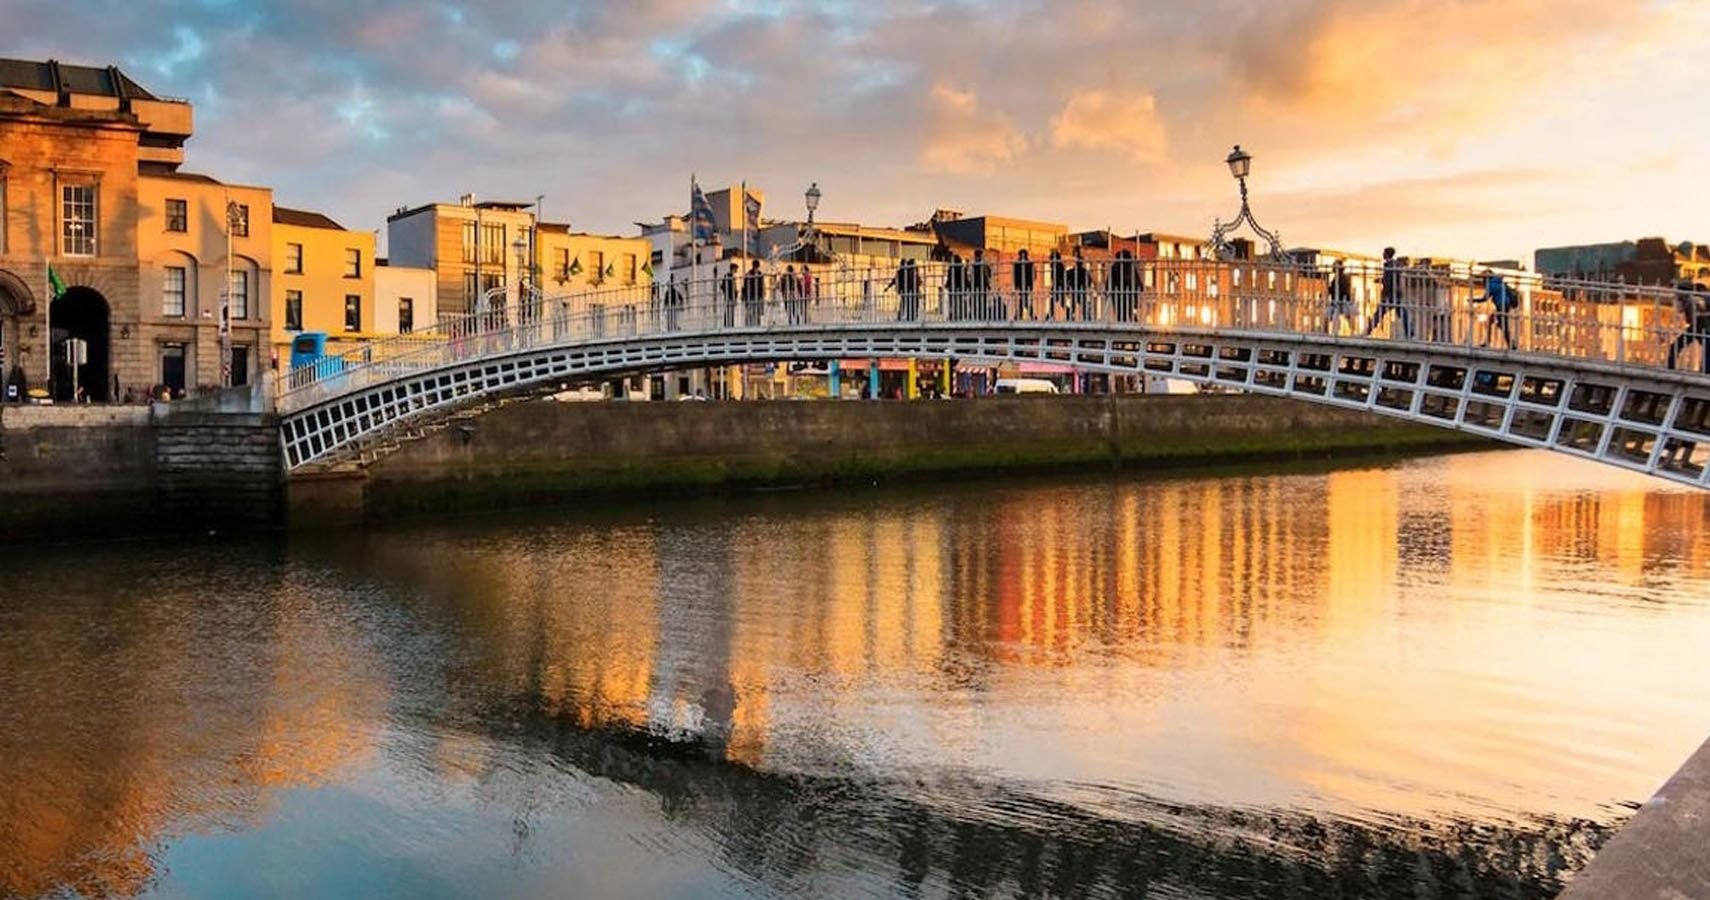 Dressing Up As A Viking, 9 Other Things To Do In Dublin, Ireland